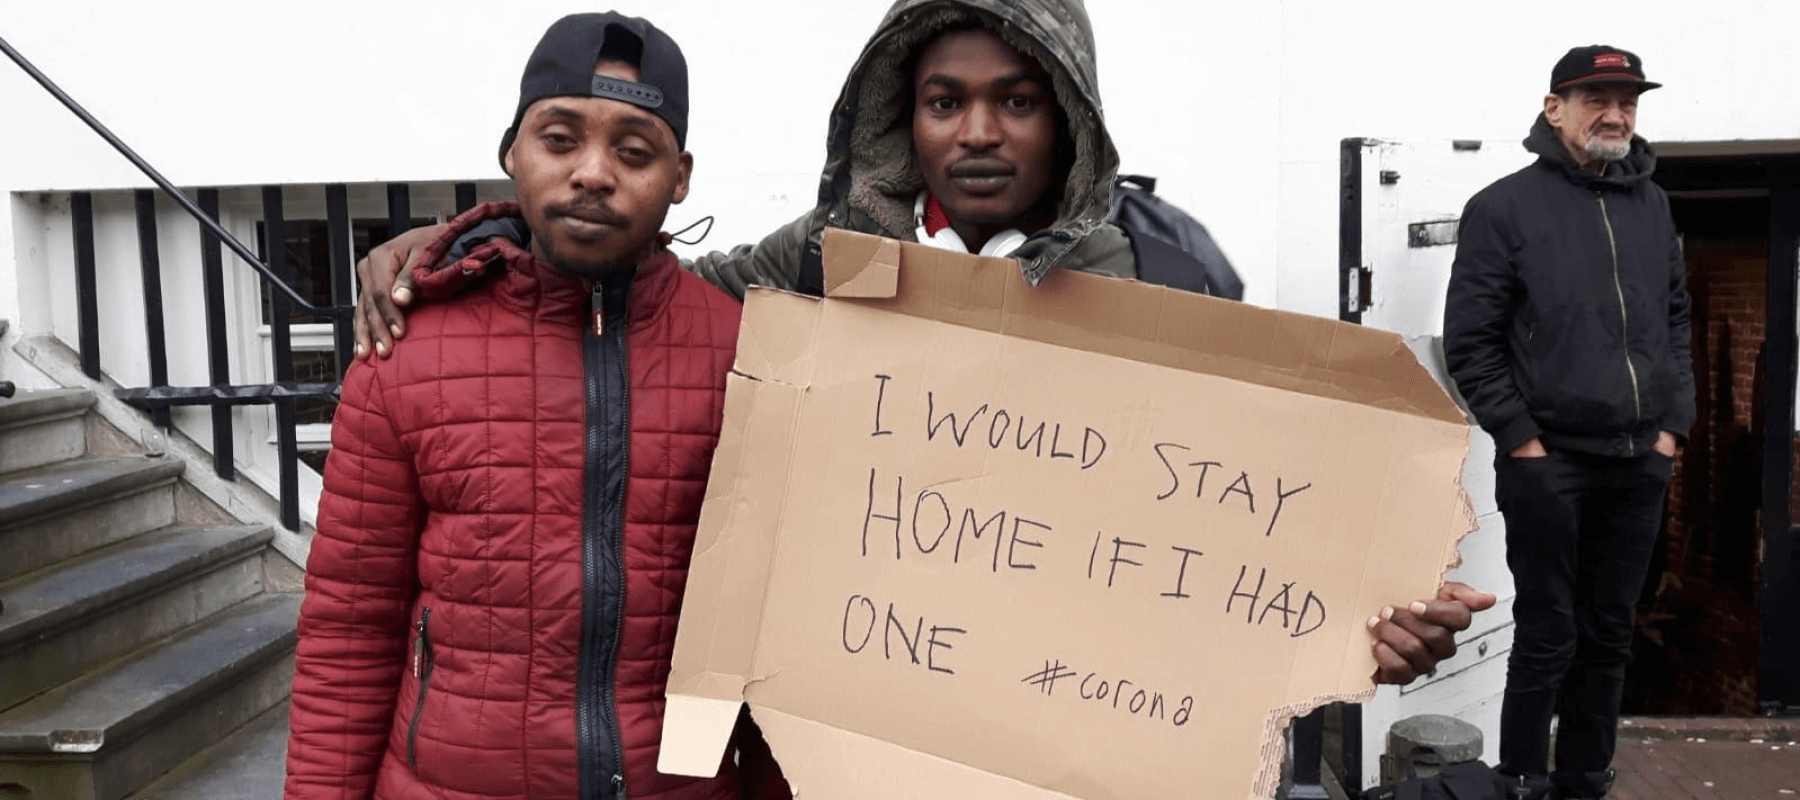 Corona crisis: Do we help the homeless in Europe together?